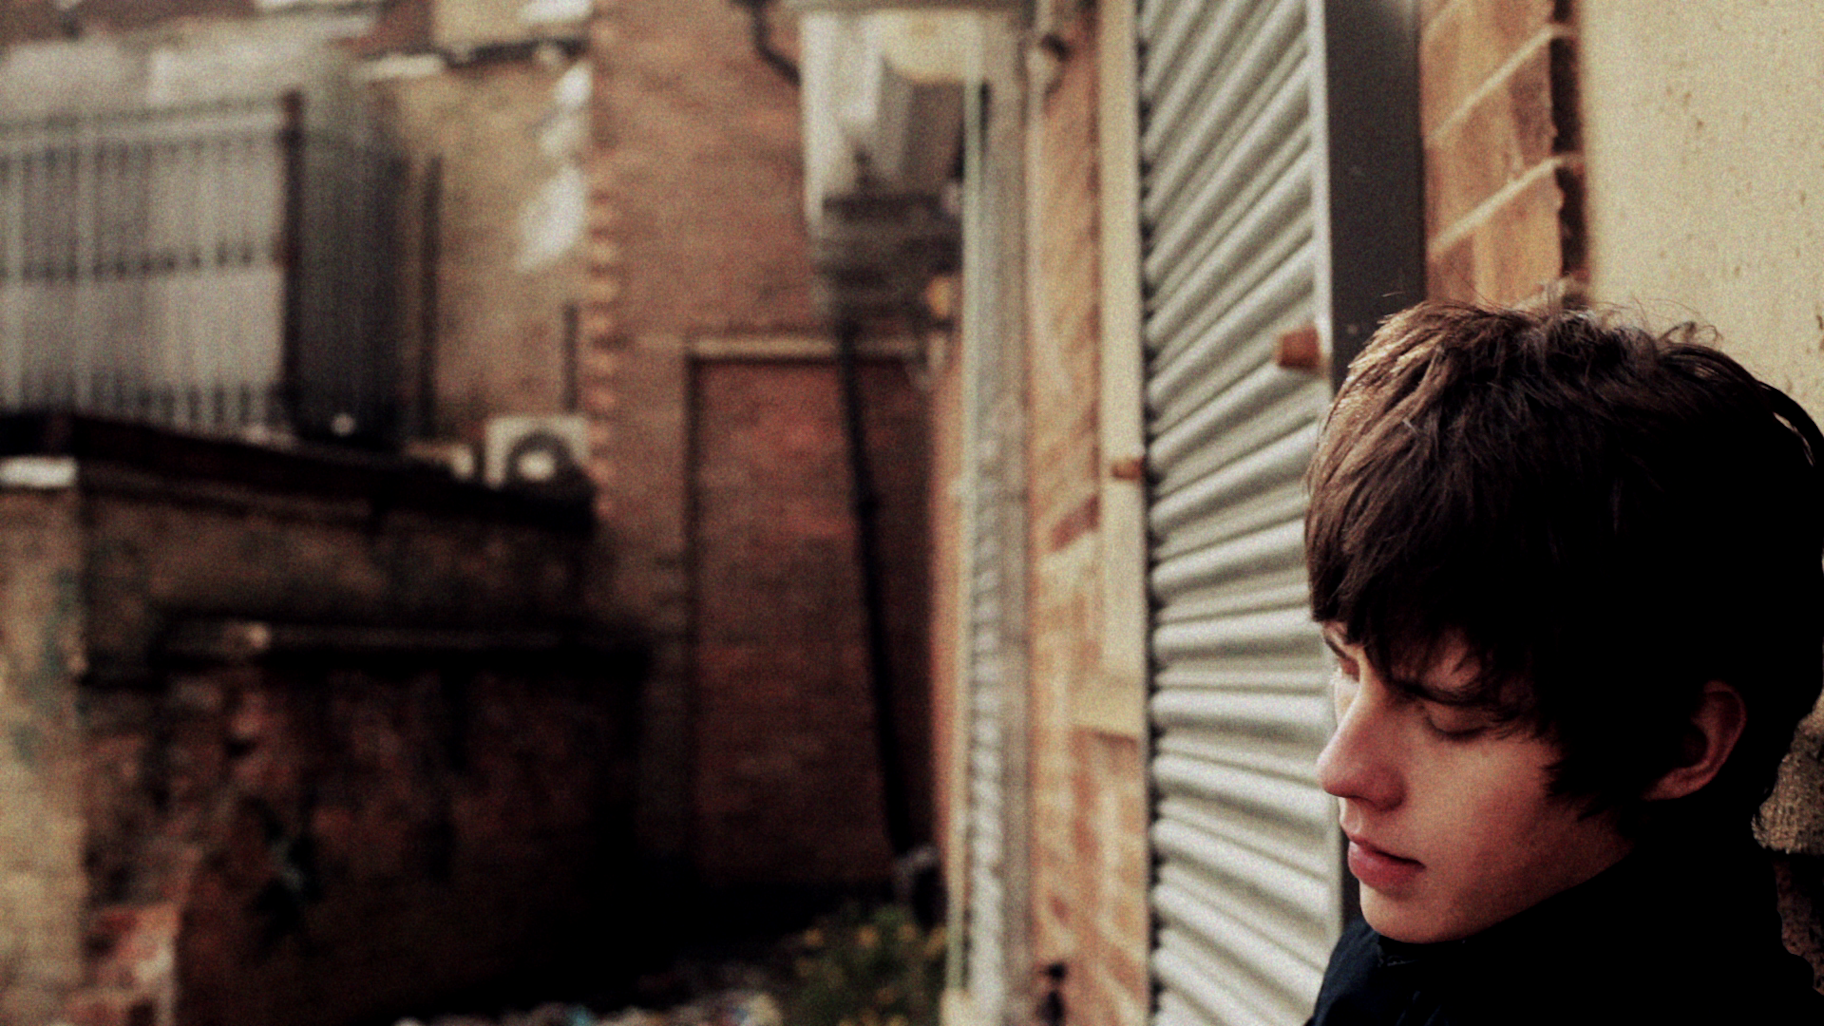 JAKE BUGG 'TROUBLE TOWN' -